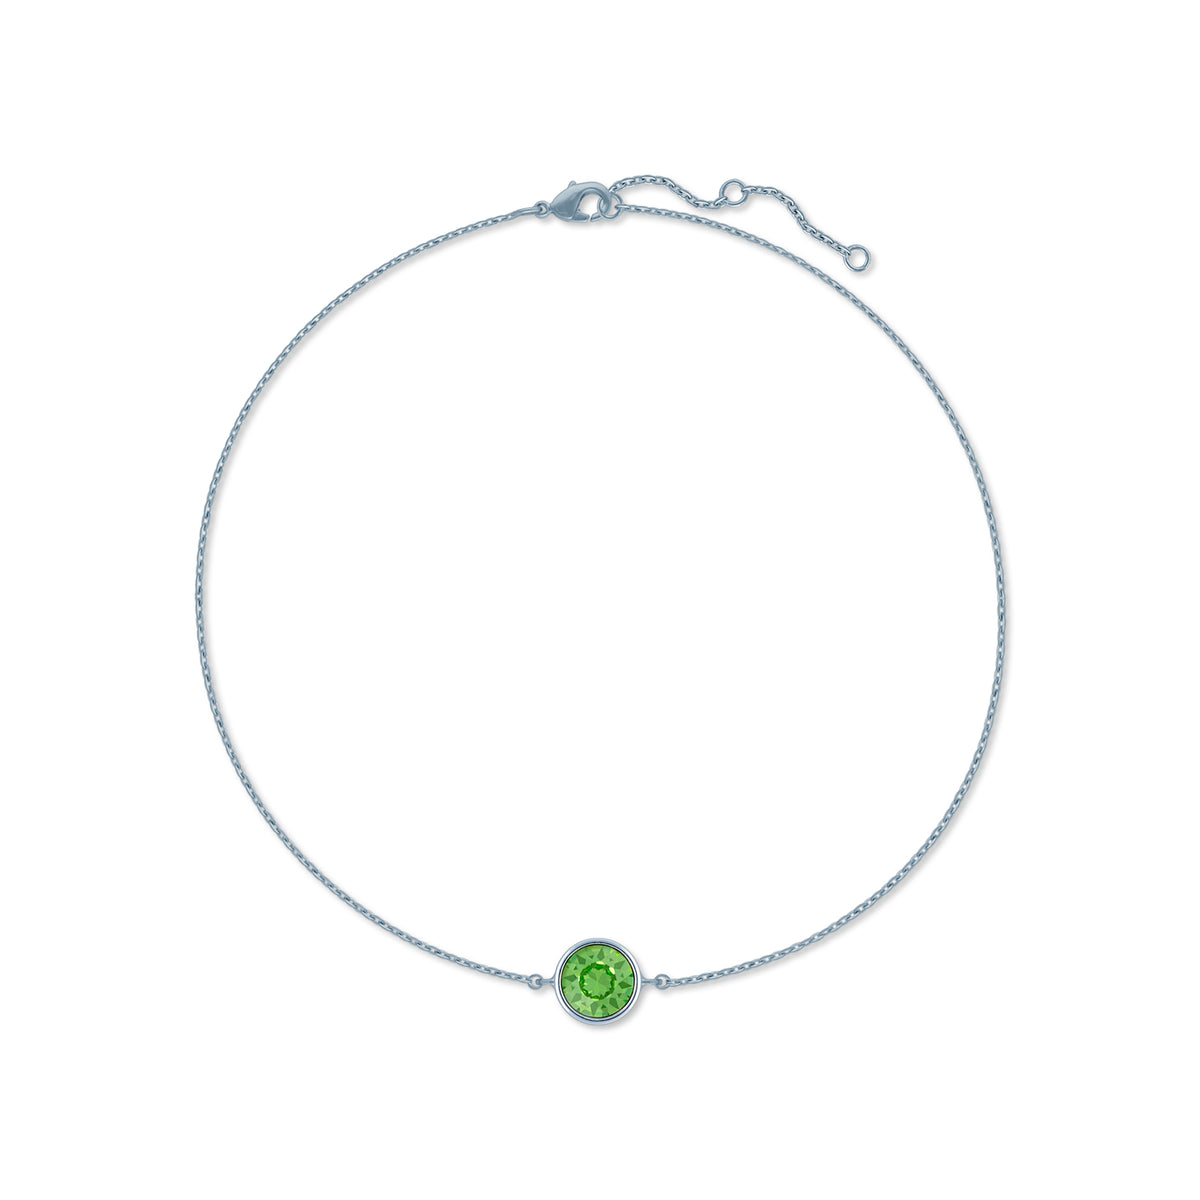 Harley Chain Bracelet with Green Peridot Round Crystals from Swarovski Silver Toned Rhodium Plated - Ed Heart